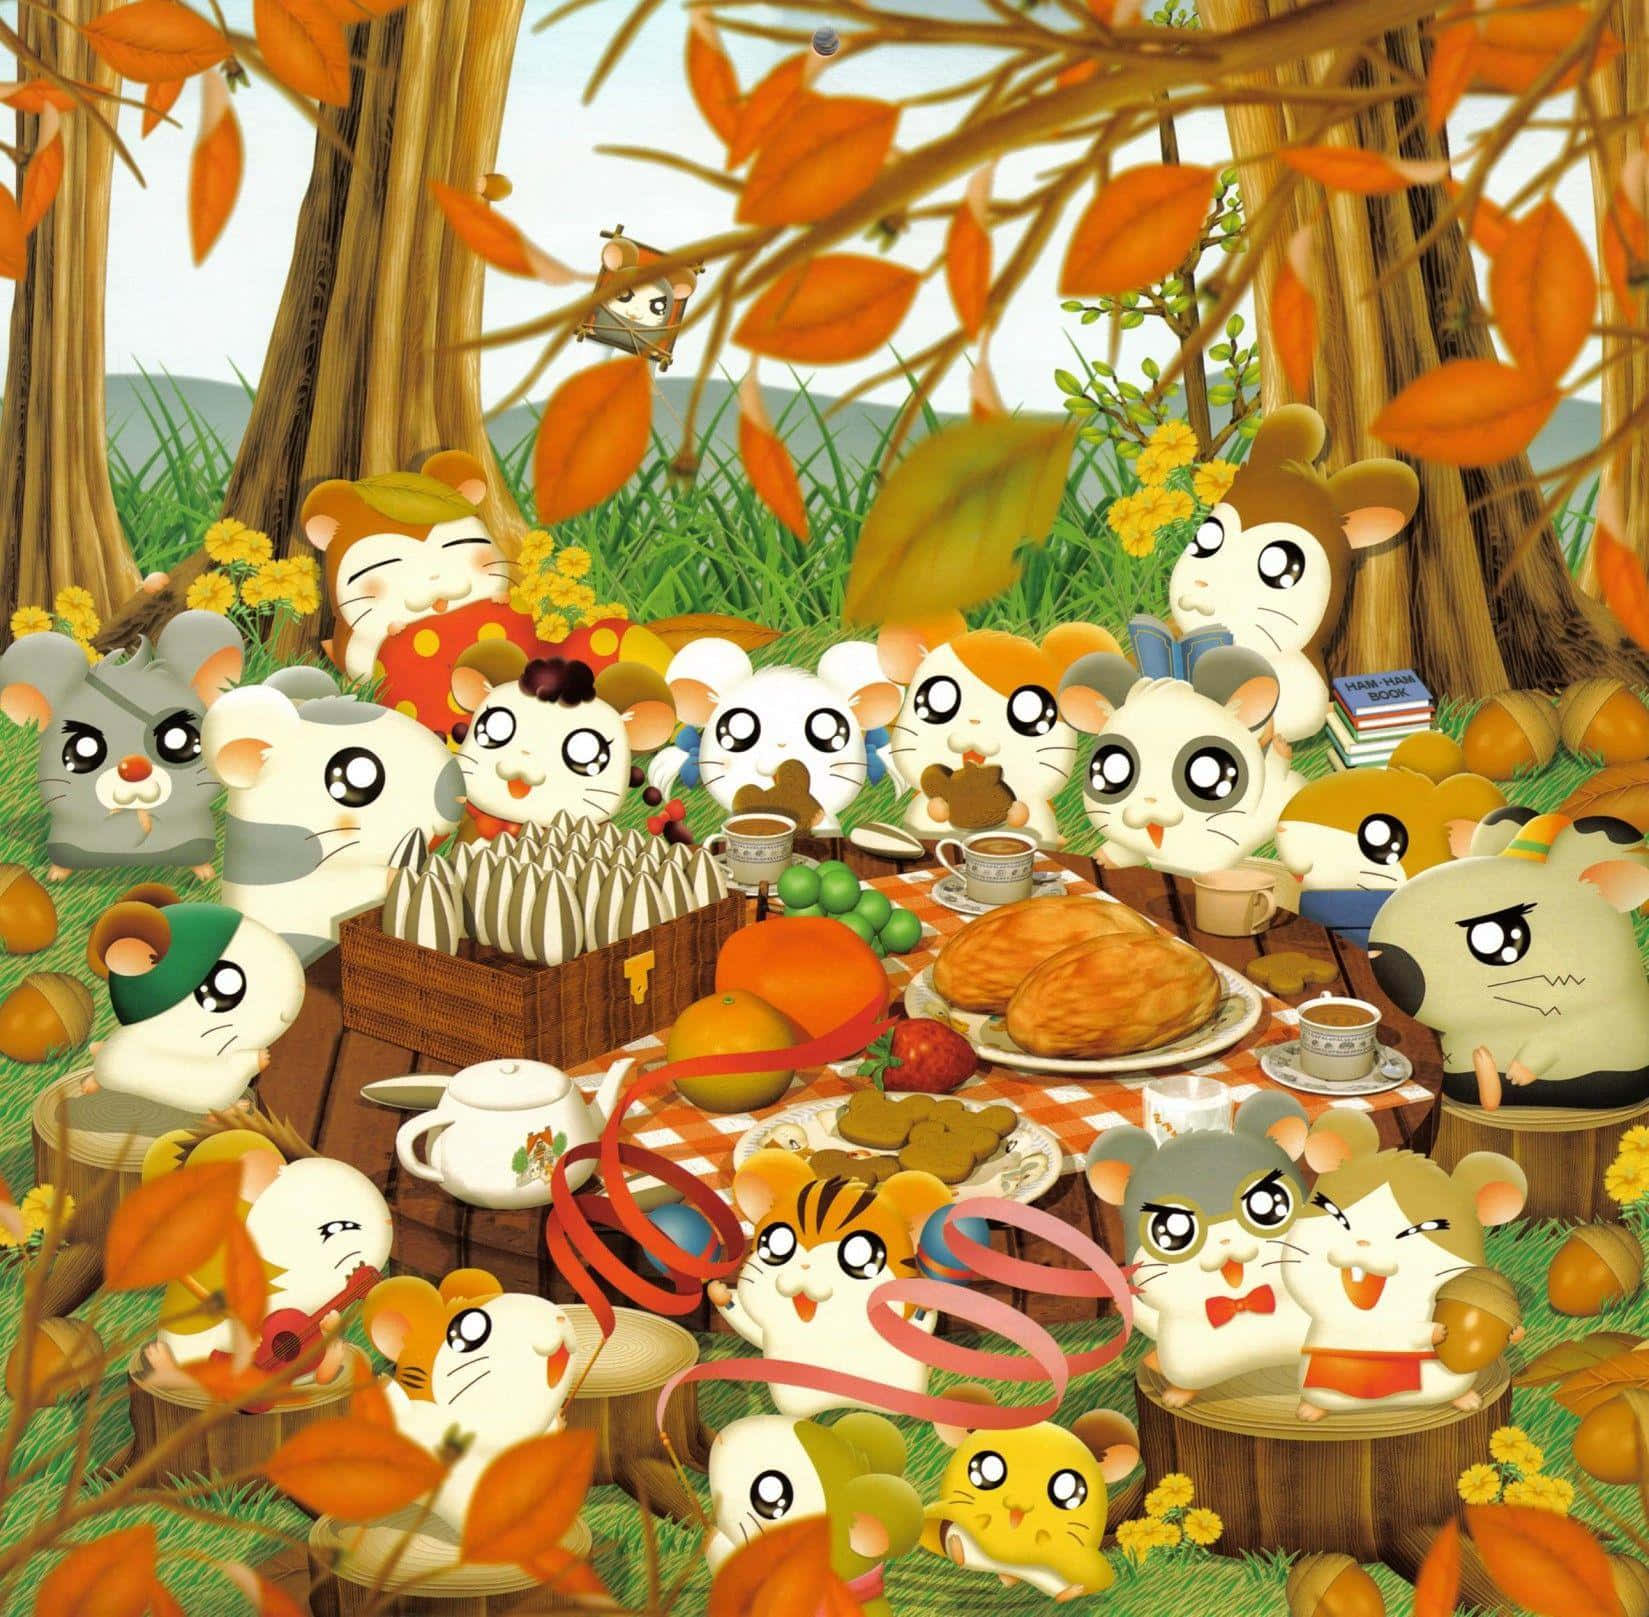 Celebrating Thanksgiving with a Thanksgiving-themed Anime party Wallpaper